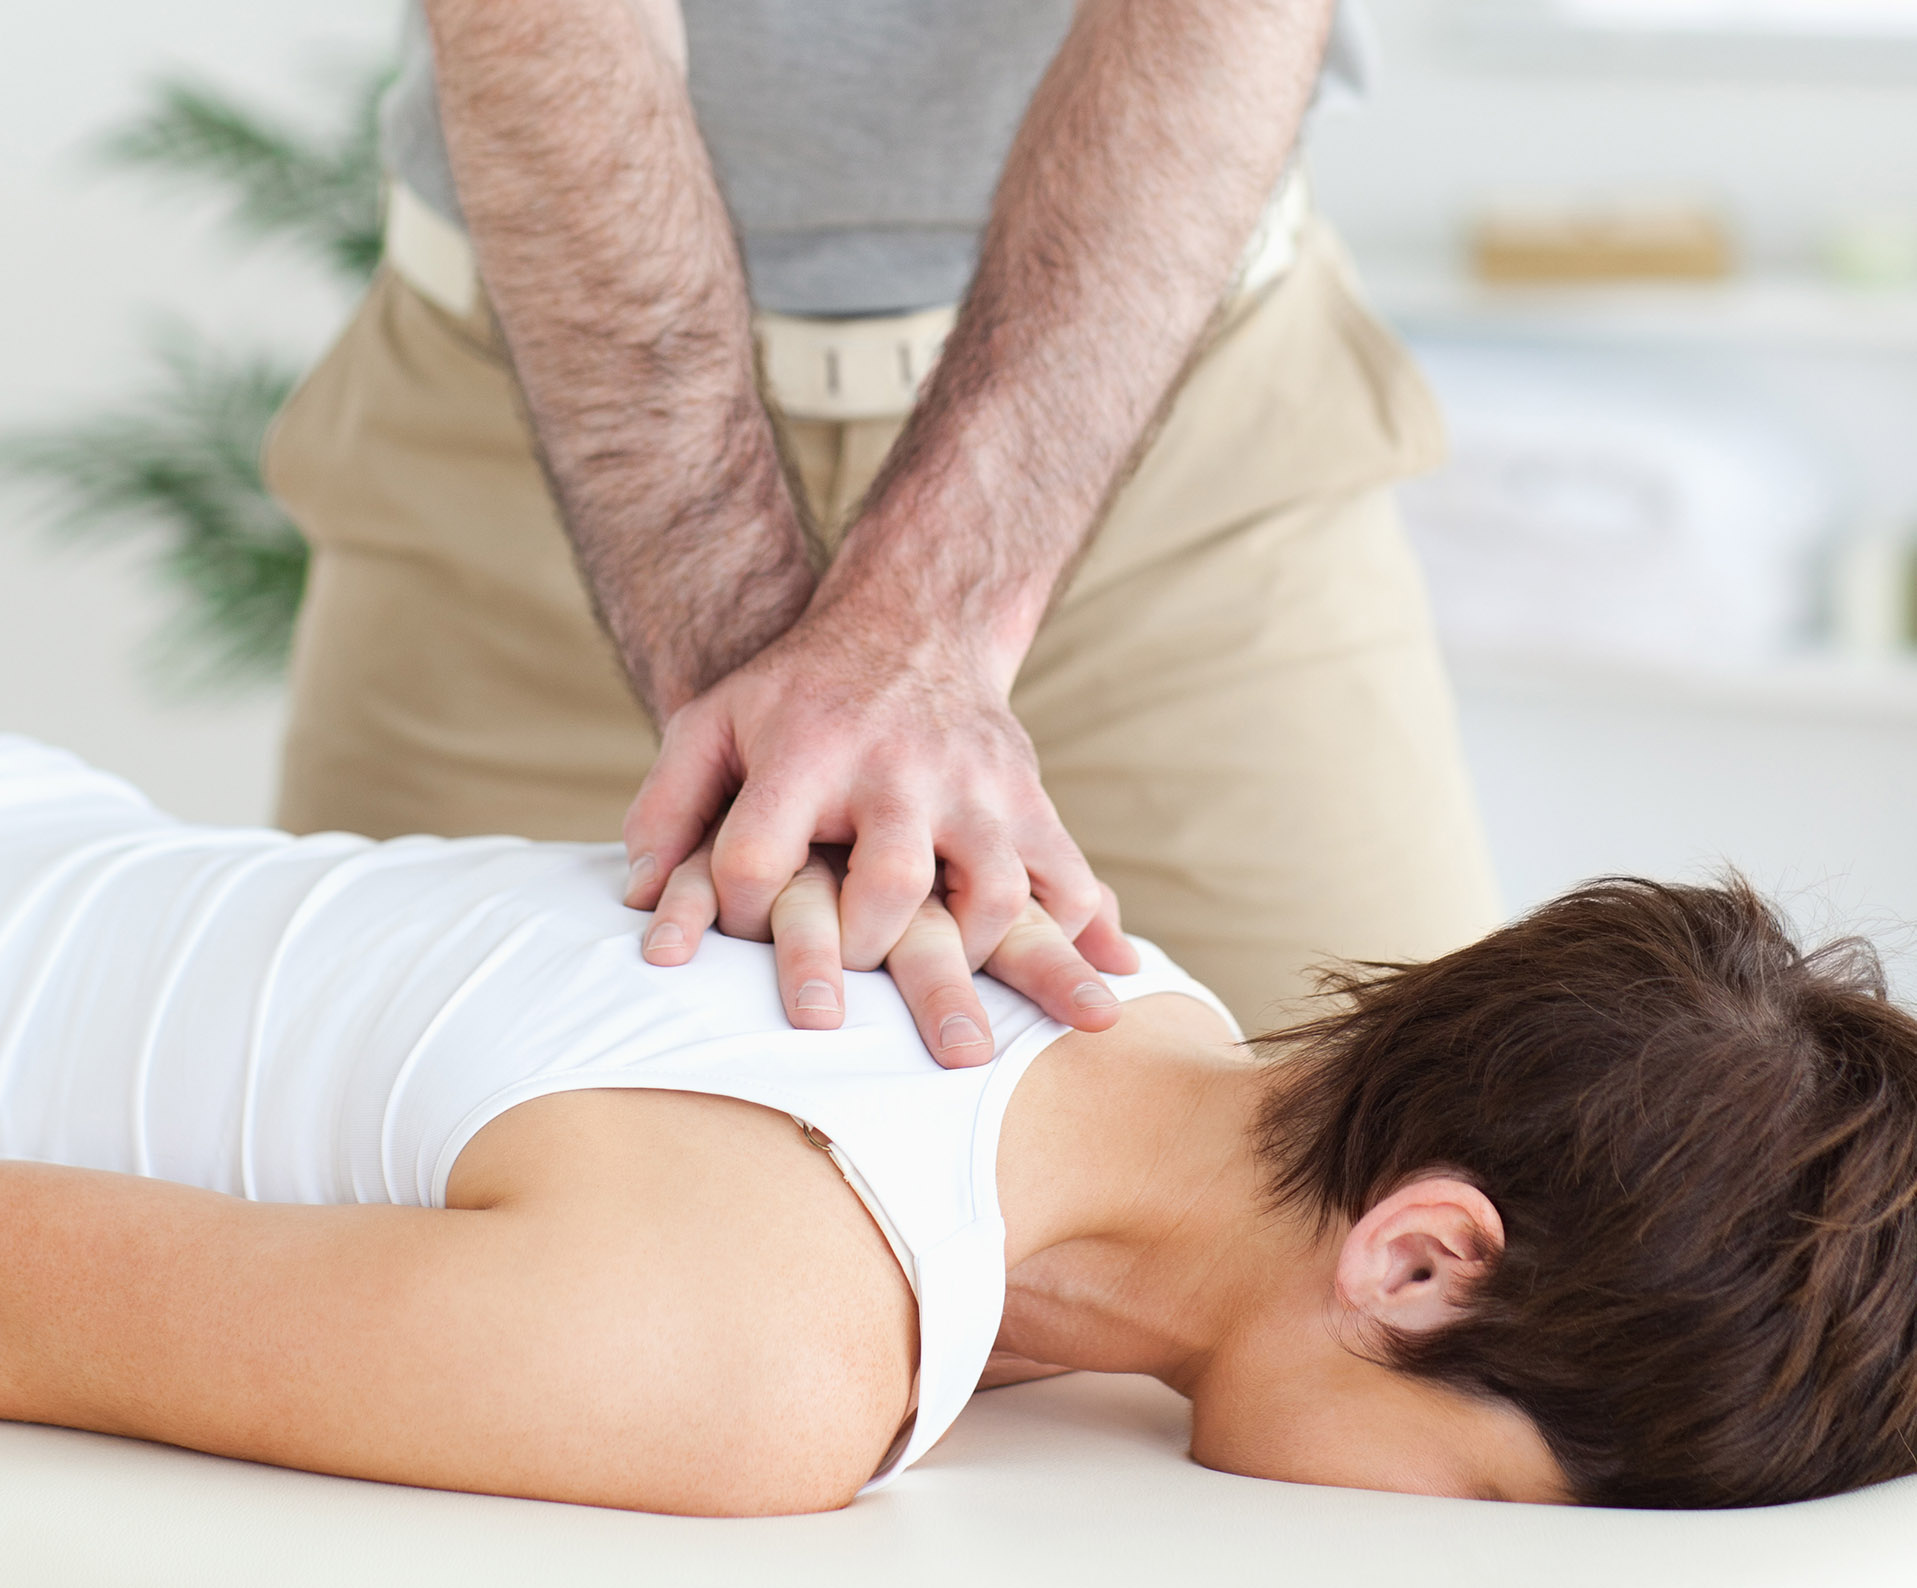 Dr. Sophia Argeropoulos - What Can Spinal Manipulation Do For Me?